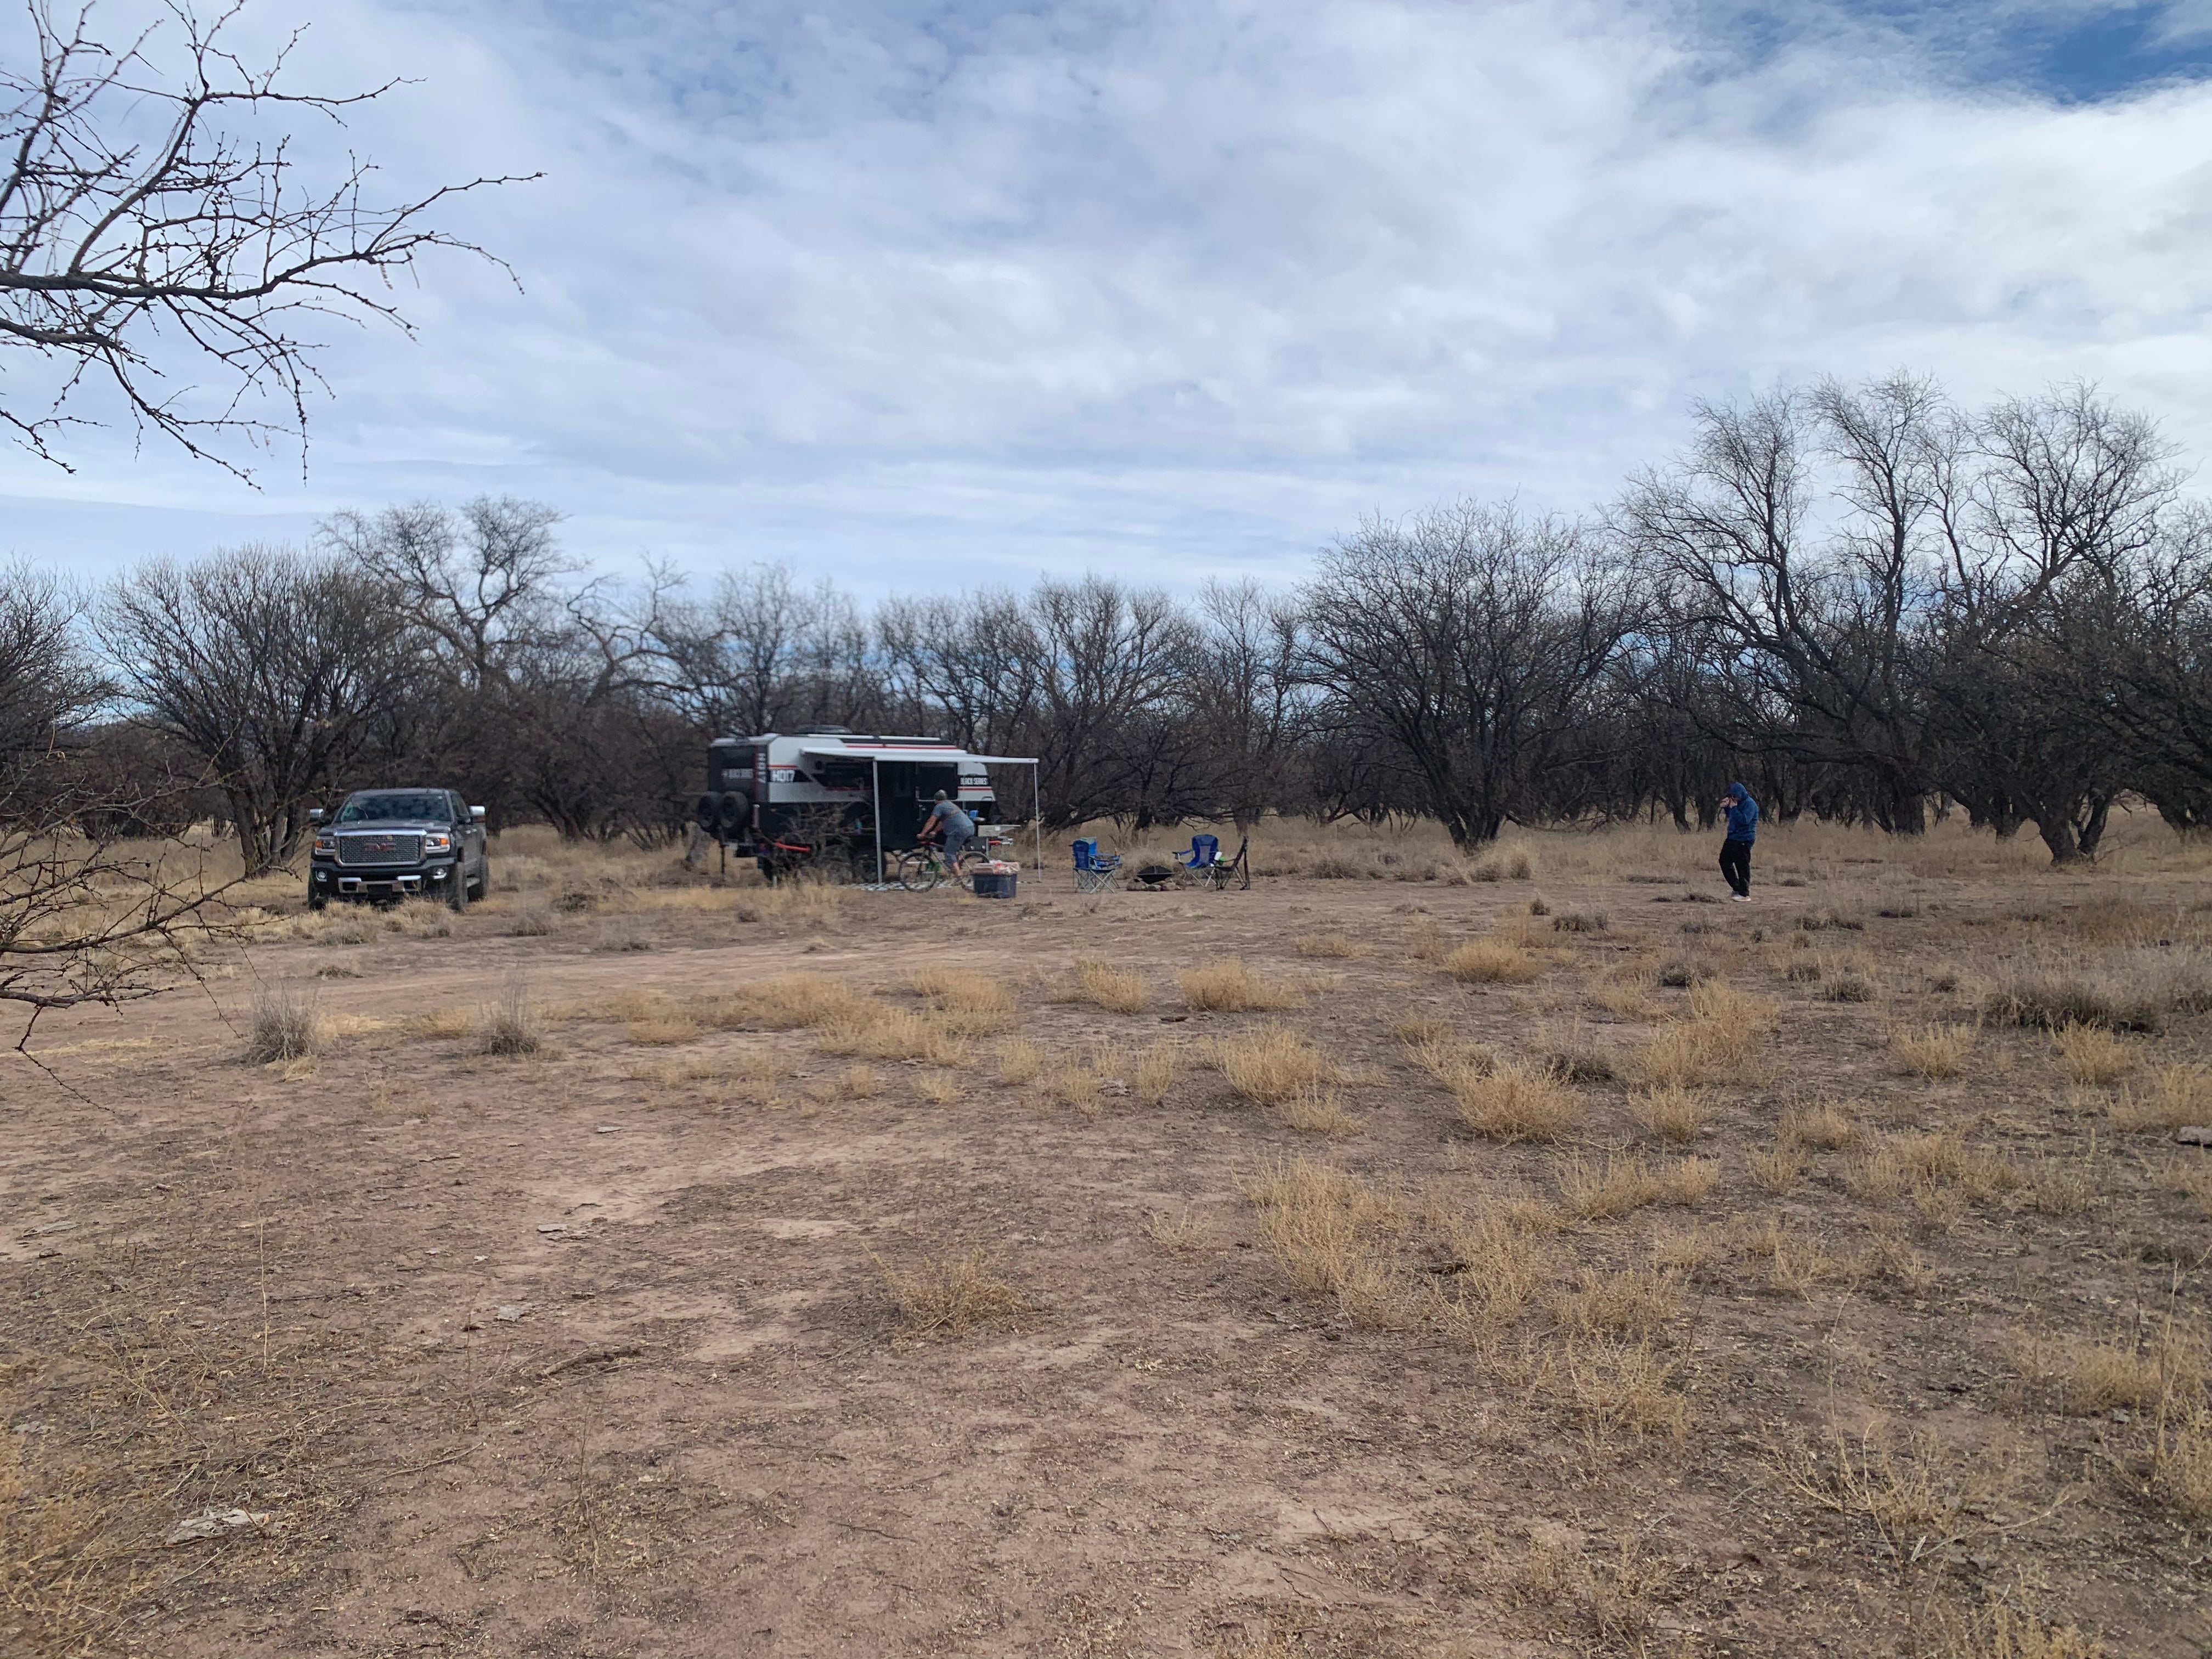 Camper submitted image from Cieneguita Dispersed Camping Area - Las Cienegas National Conservation Area - 1